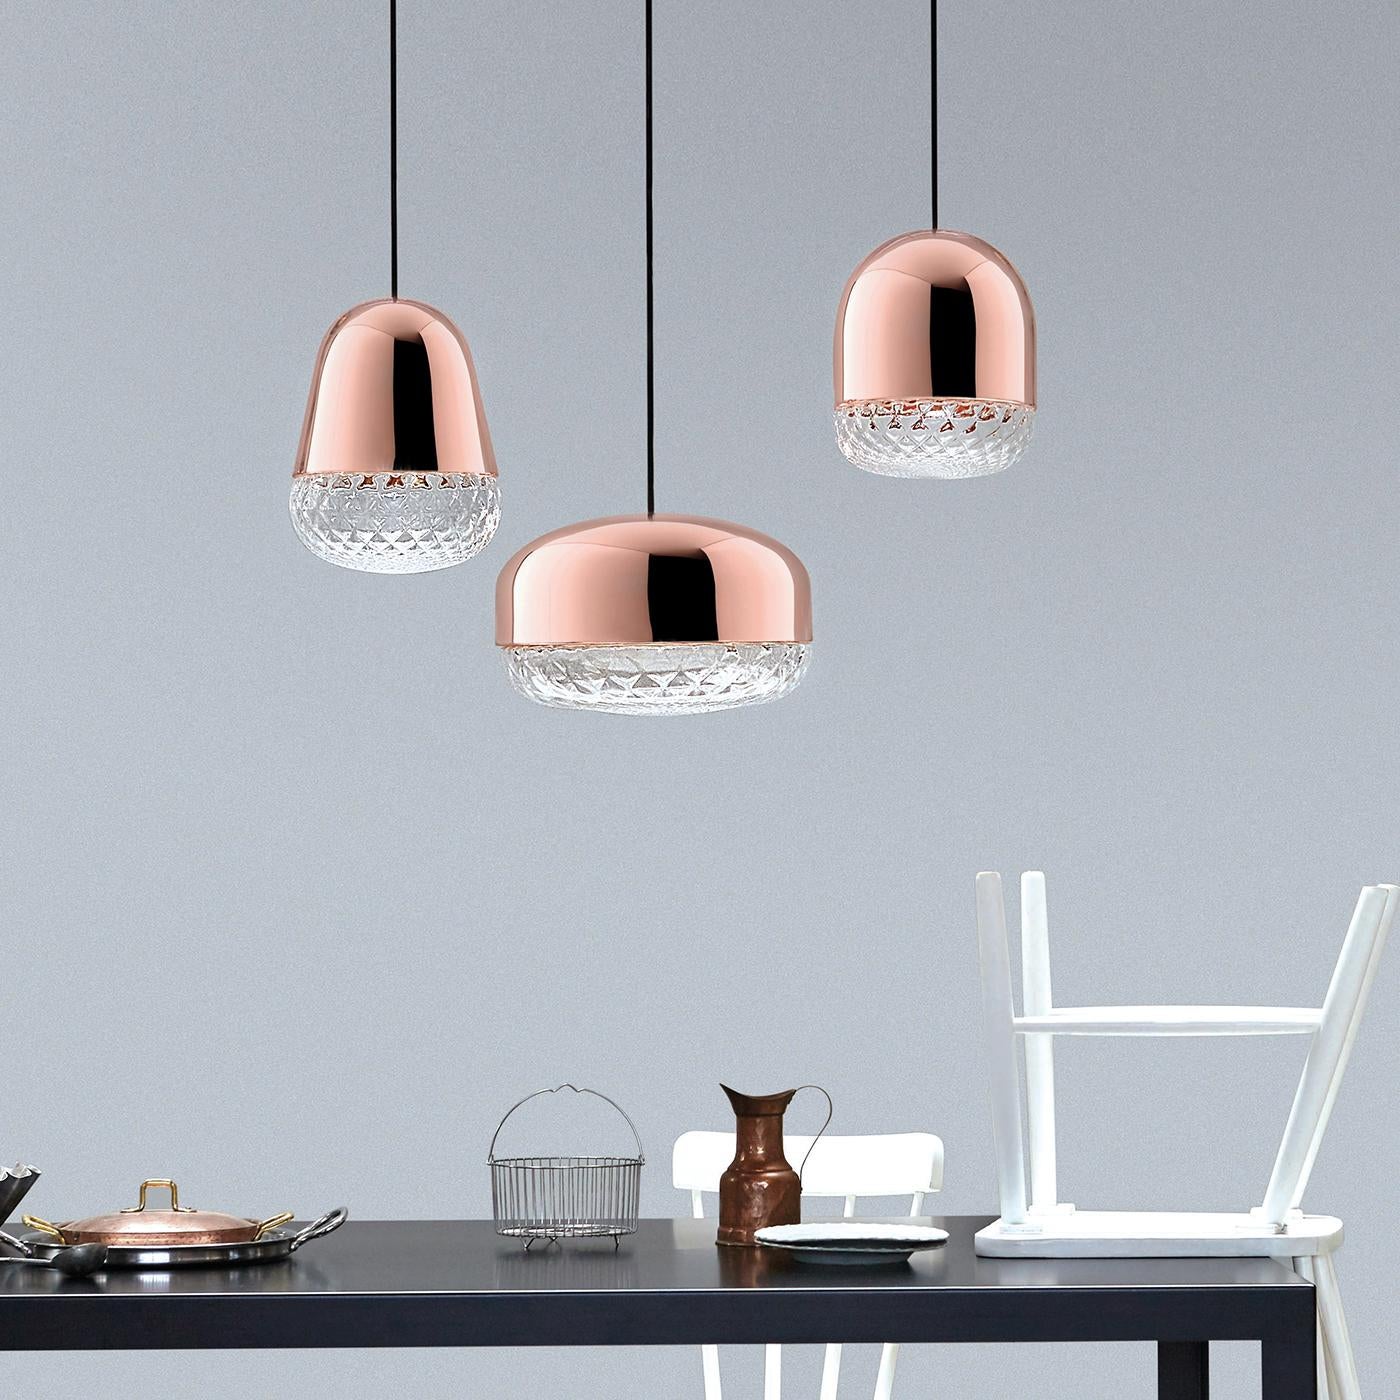 Fluid and soft lines characterize this exquisite pendant by Matteo Zorzenoni. Finished in glossy copper, its elongated, dome-shaped silhouette is enriched by a precious, mouth-blown glass lampshade crafted according to the century-old Venetian